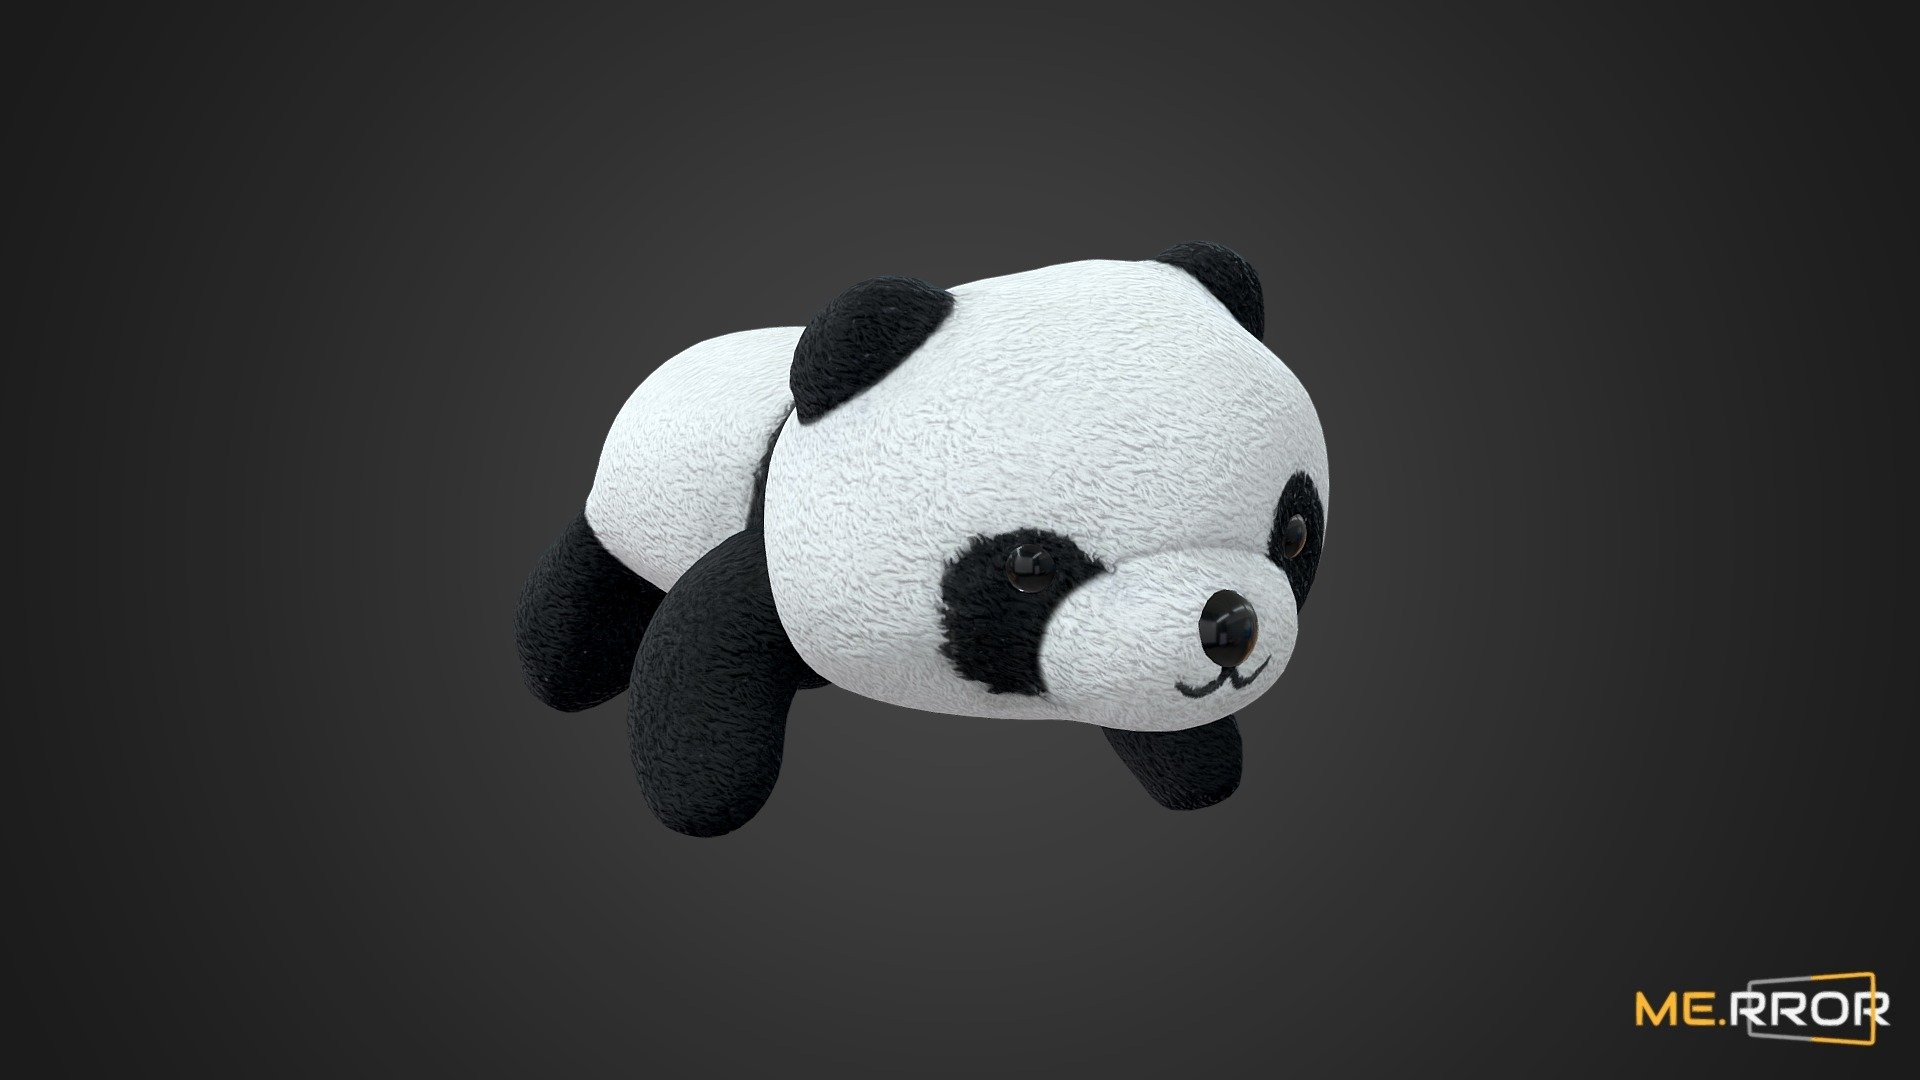 MERROR is a 3D Content PLATFORM which introduces various Asian assets to the 3D world


3DScanning #Photogrametry #ME.RROR - [Game-Ready] Panda Doll - Buy Royalty Free 3D model by ME.RROR (@merror) 3d model